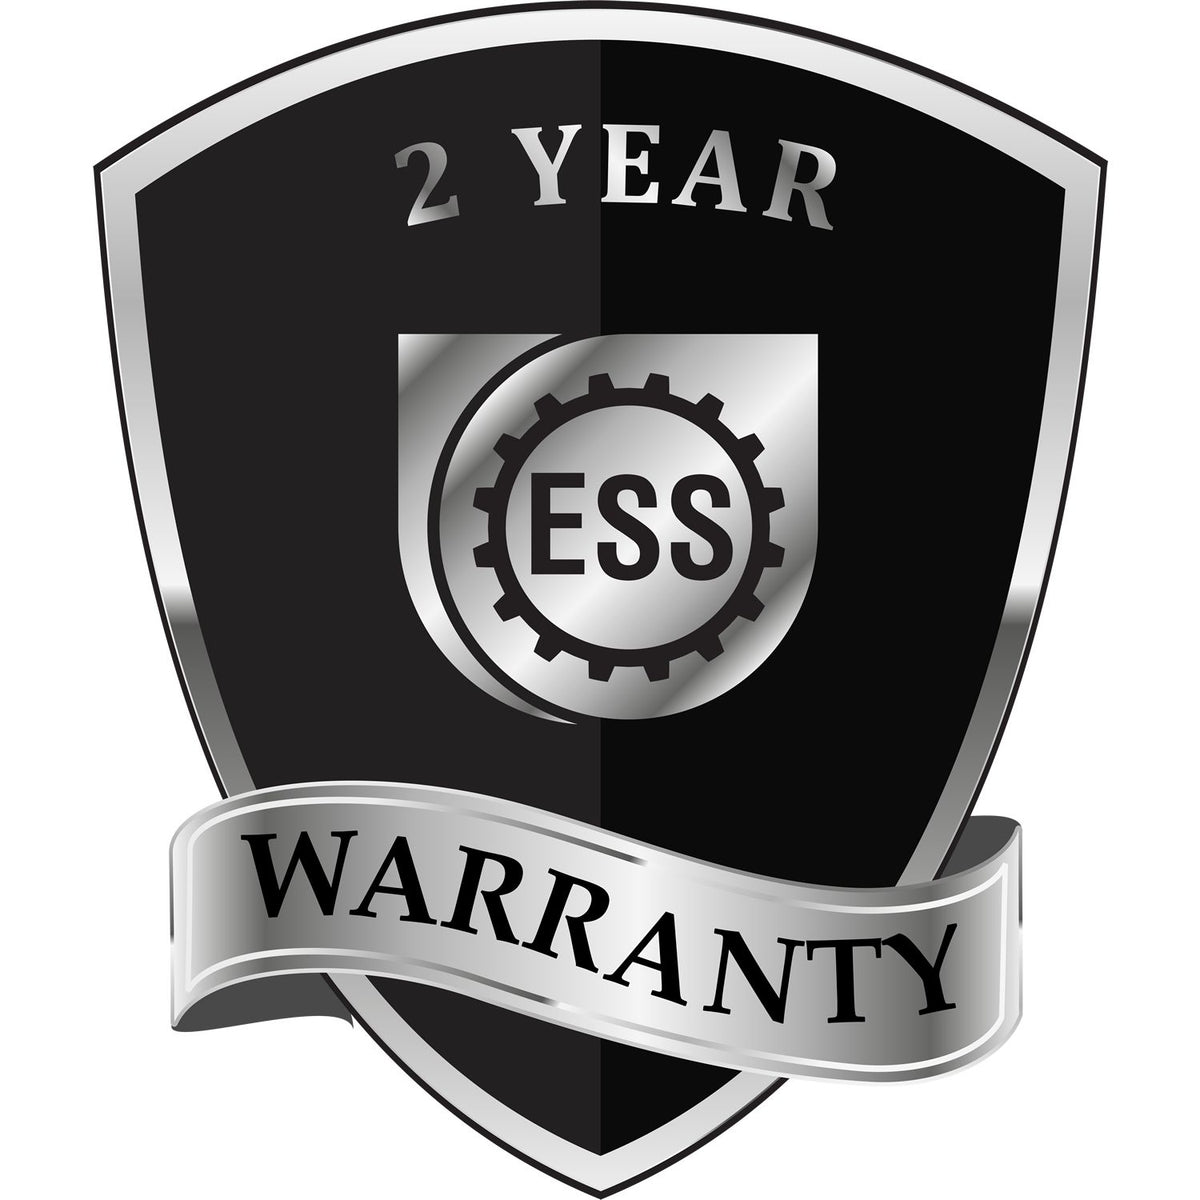 A black and silver badge or emblem showing warranty information for the Pennsylvania Geologist Desk Seal